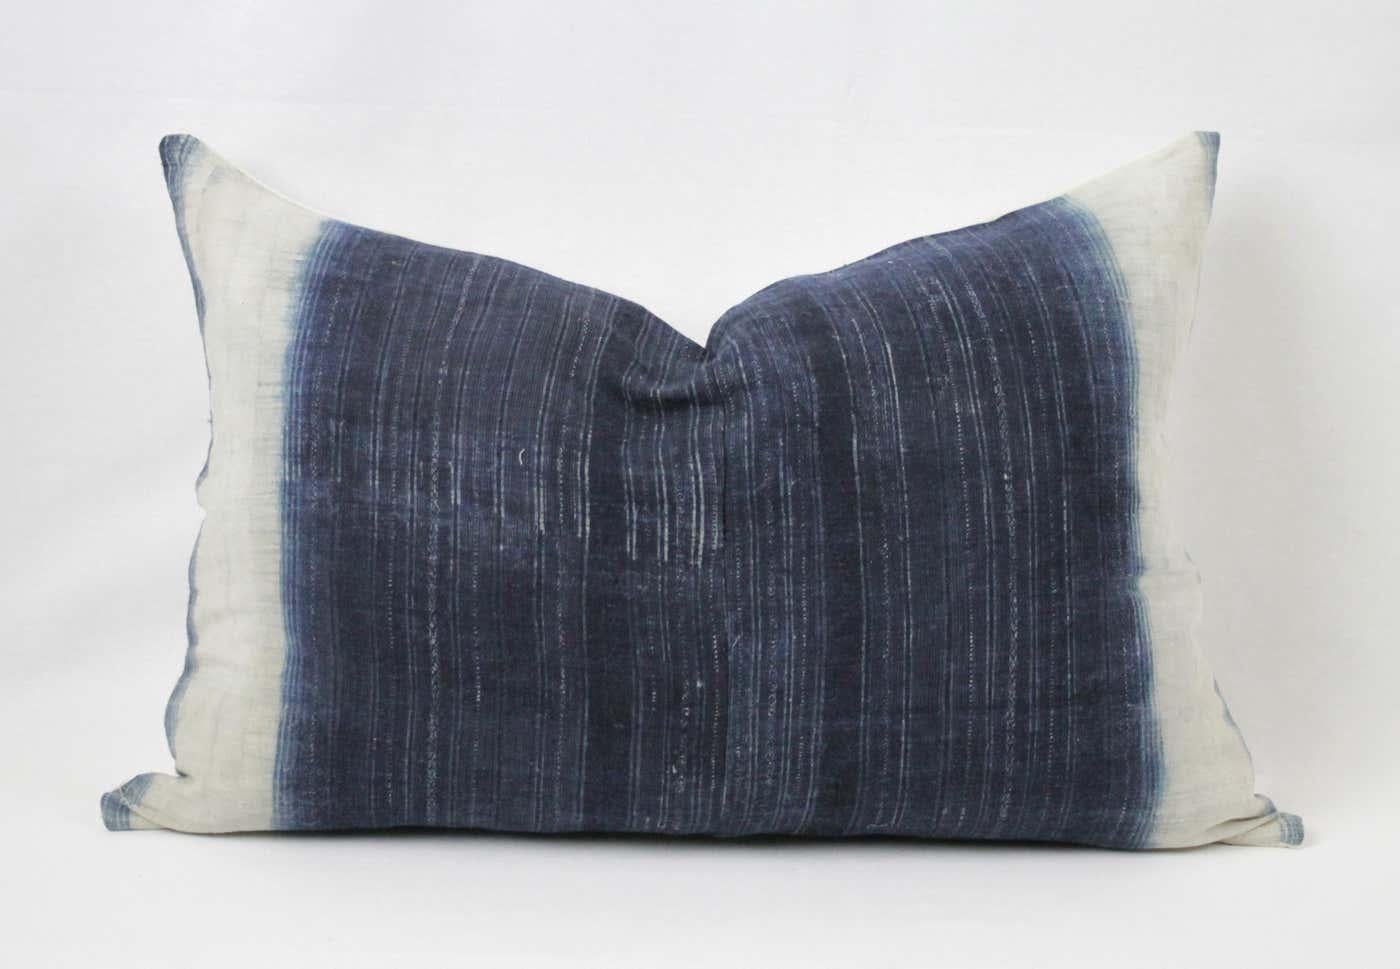 Vintage vertical indigo blue and white batik style pillow, with zipper closure. Back is in a natural antique French linen. Pillow is darkest in the center and then fades out to an off-white. Main colors are indigo blue, off-white, medium blue, and